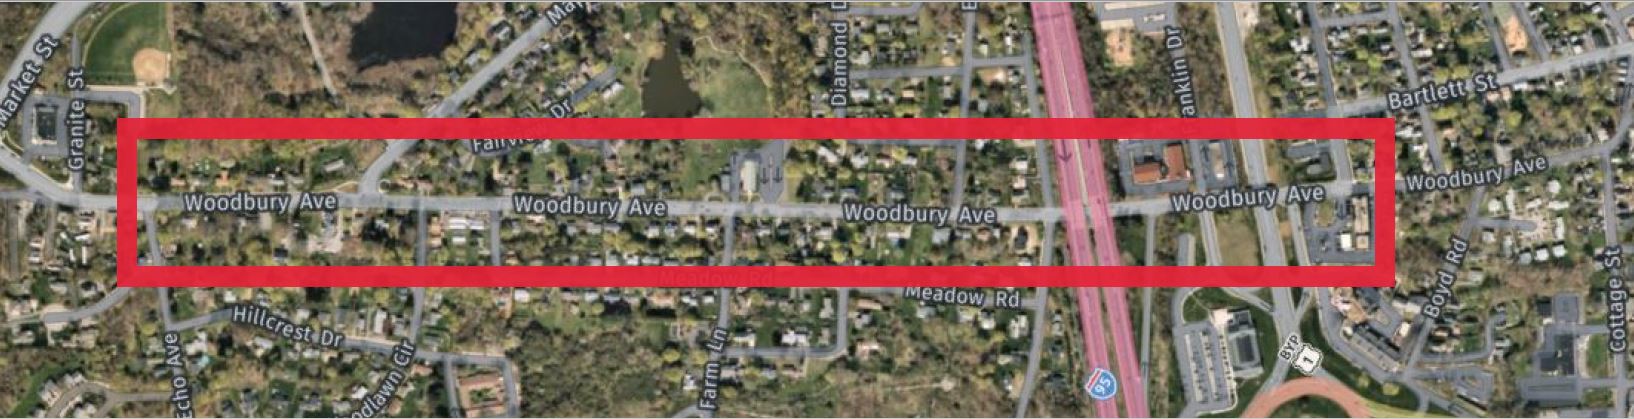 Woodbury Ave. Project Extent